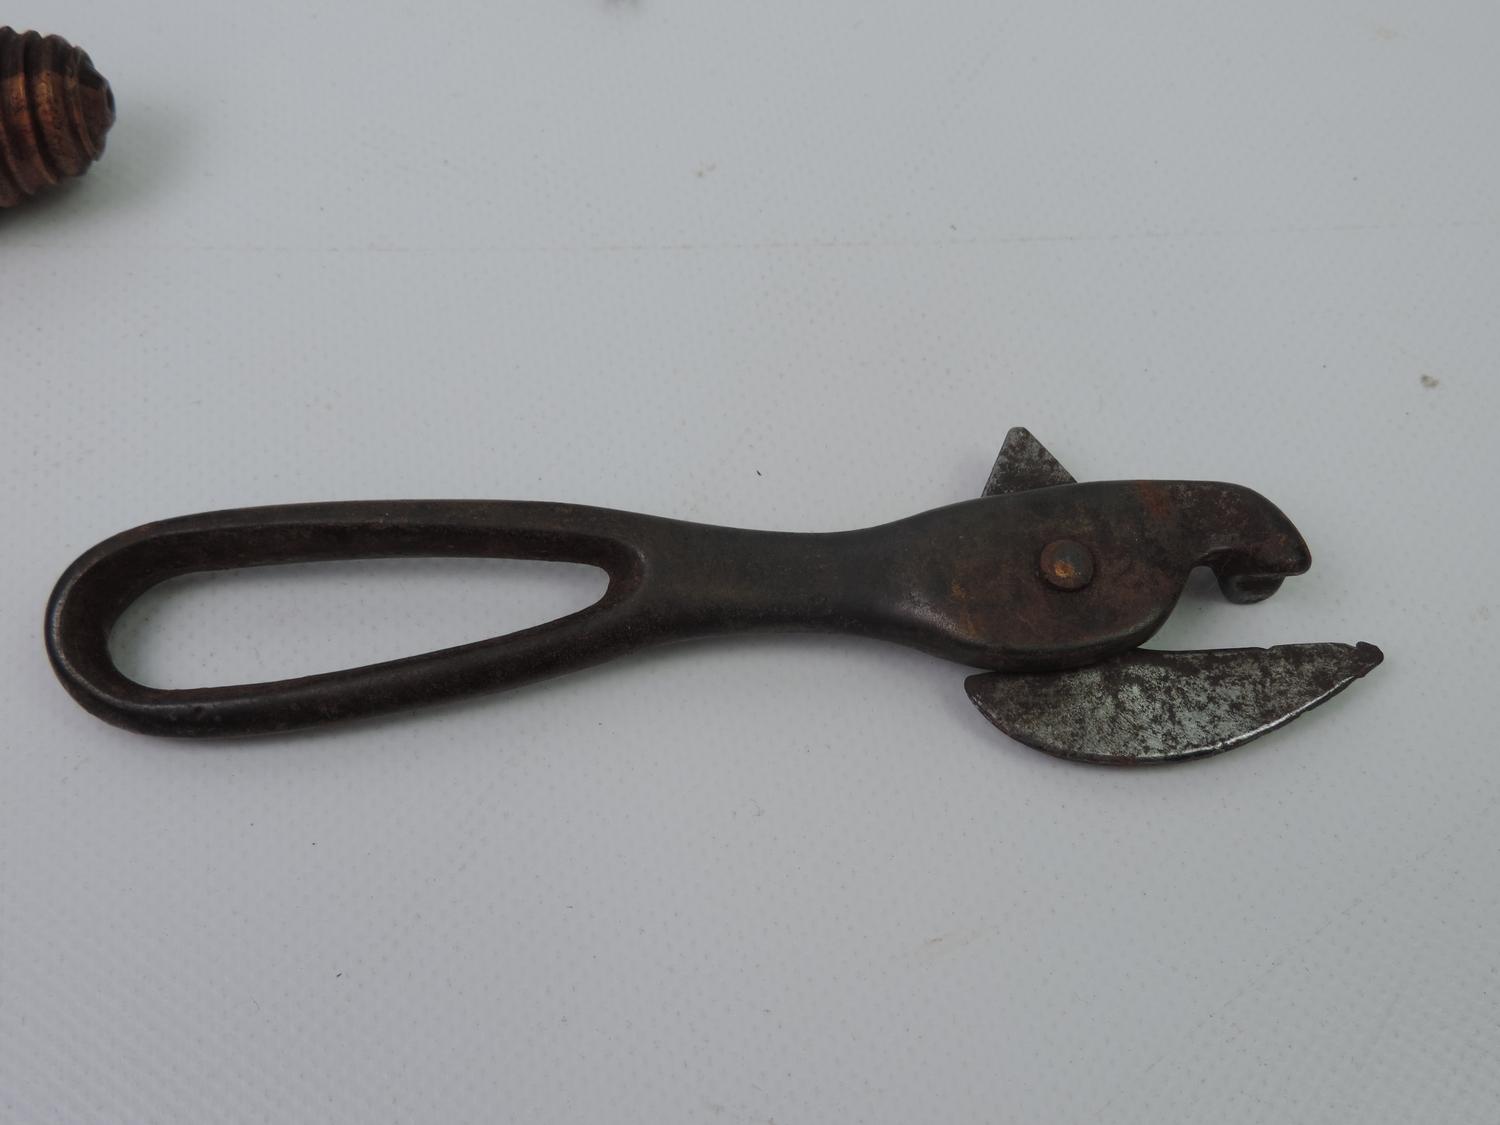 3x Vintage Cork Screws and 2x Can Openers - One in the form of a Cow - Image 6 of 6